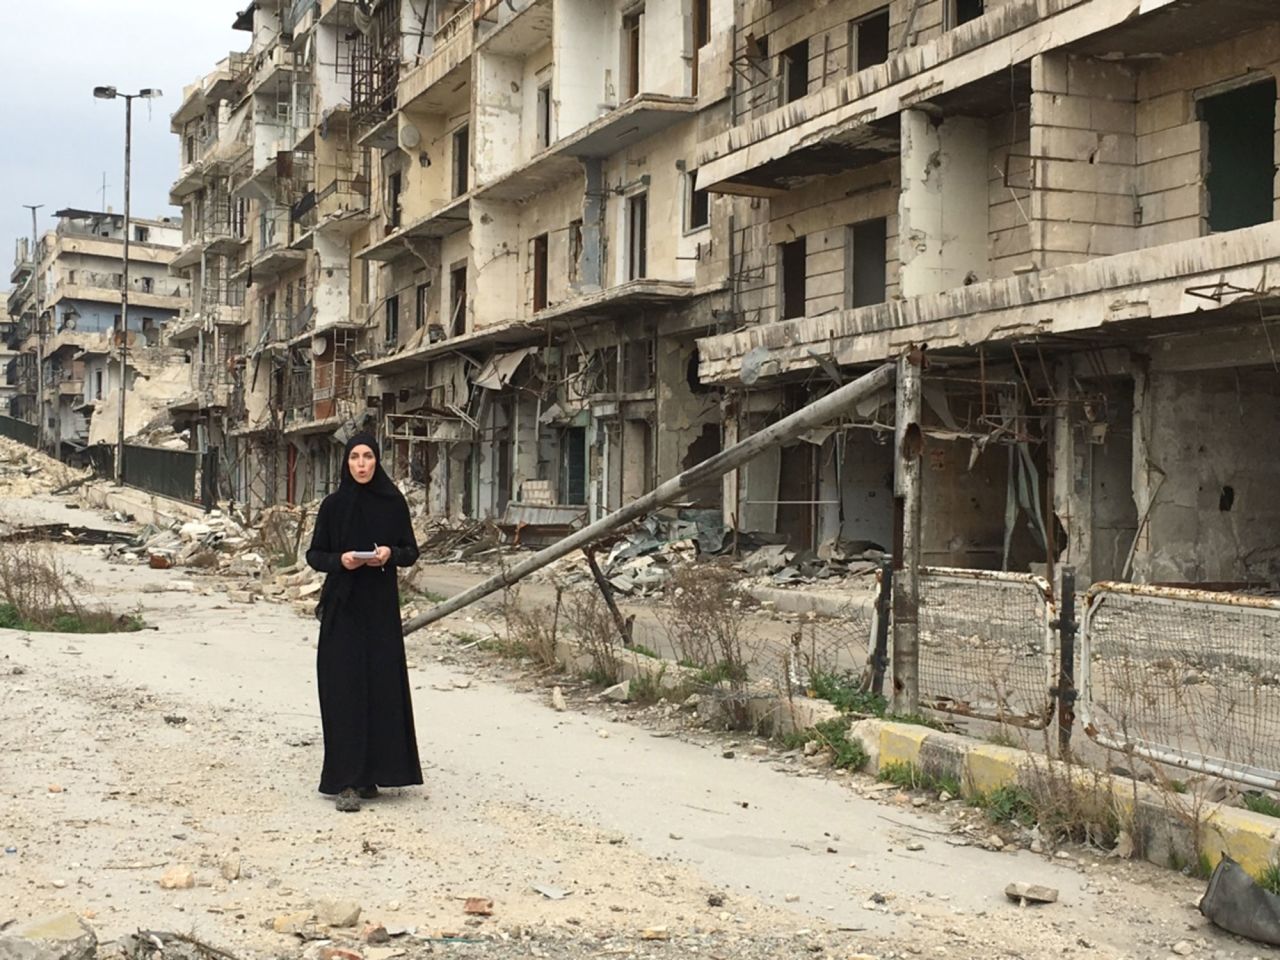 CNN's Clarissa Ward reports from Aleppo, Syria, in February 2016. The assignment took Ward to places almost no Western journalists had visited in over a year. The team traveled undercover with Ward wearing the niqab, a black veil that covers the entire face except for a small slit at the eyes. "We wanted to see for ourselves what life is like under the bombs," Ward said.